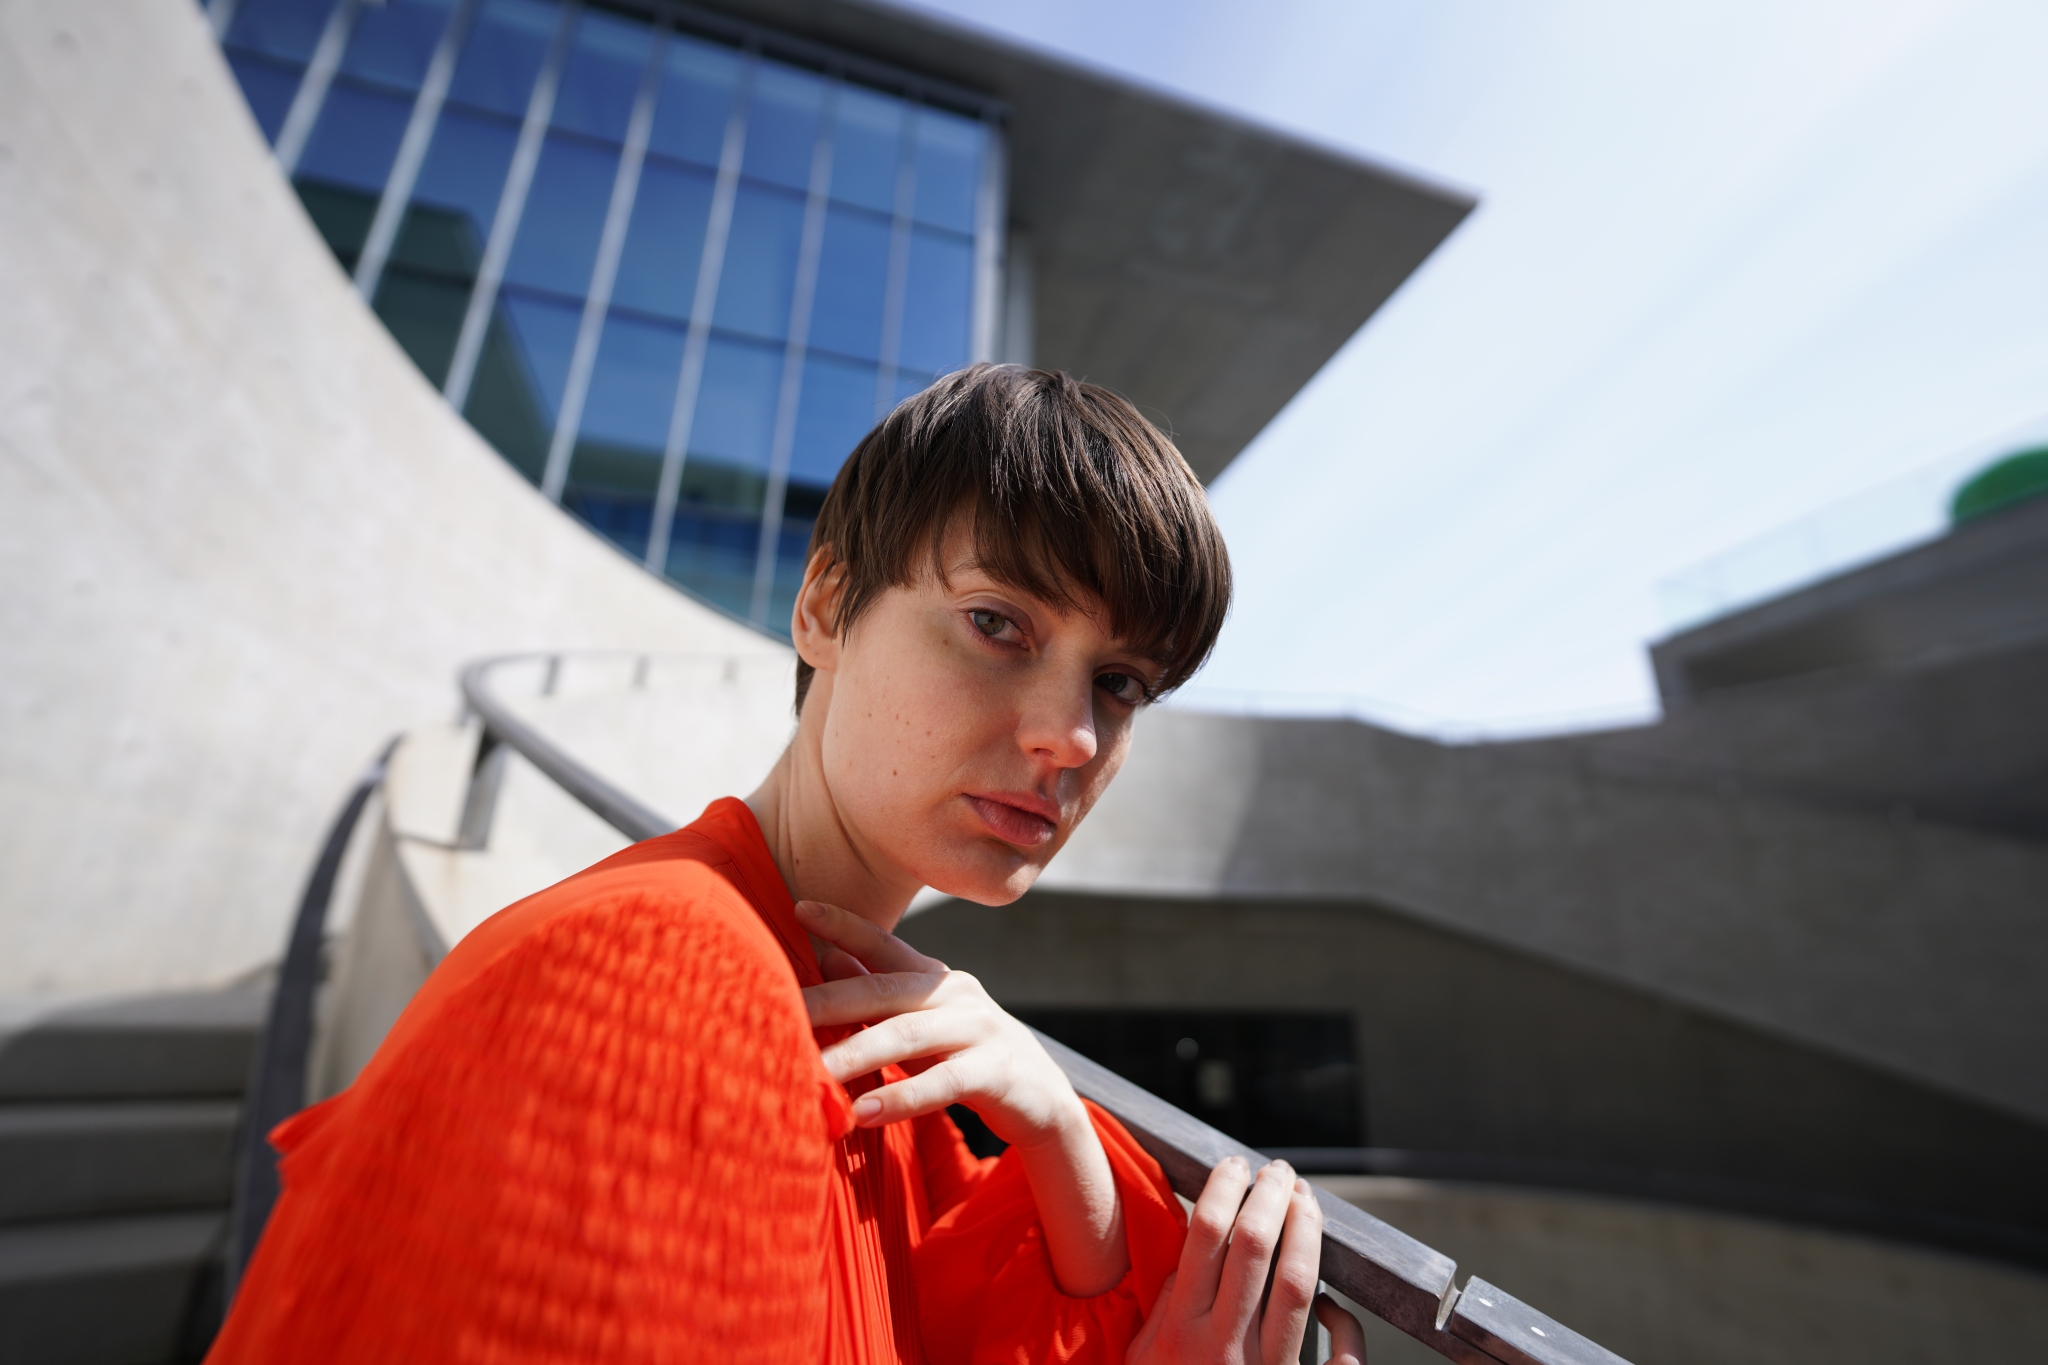 Portrait of female model in front of concrete and glass building